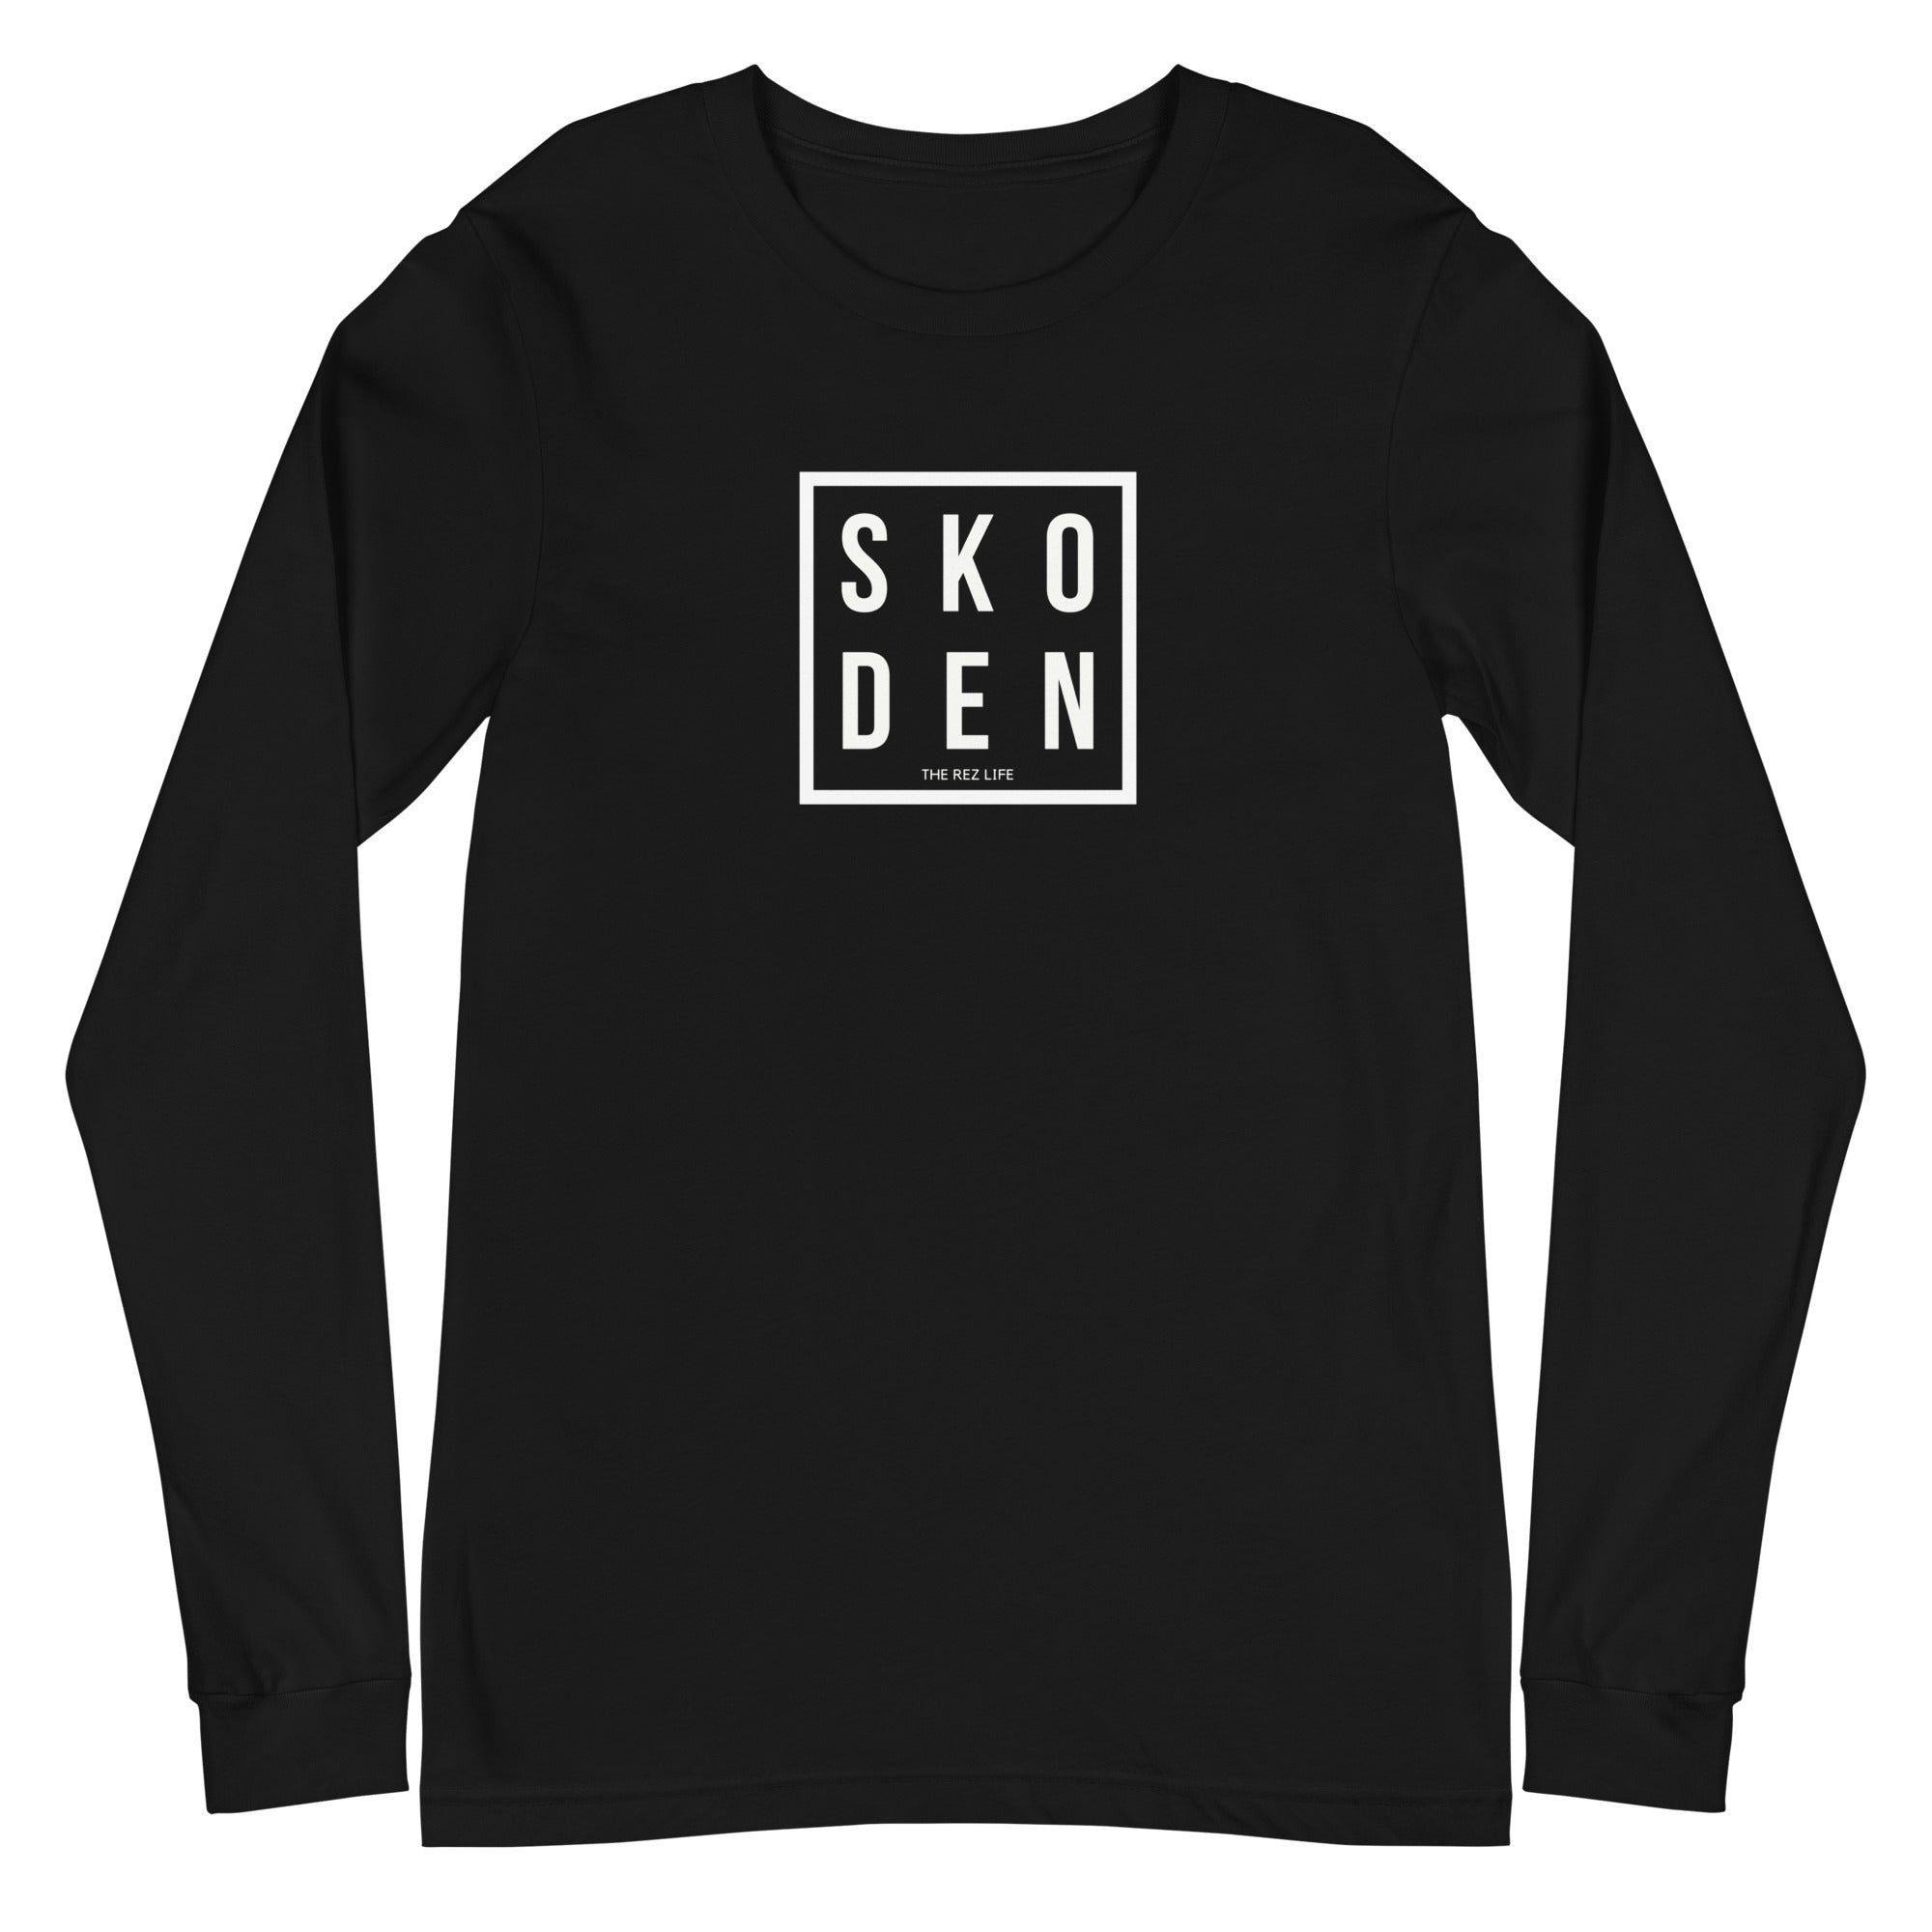 You ready to SKODEN? Long Sleeve